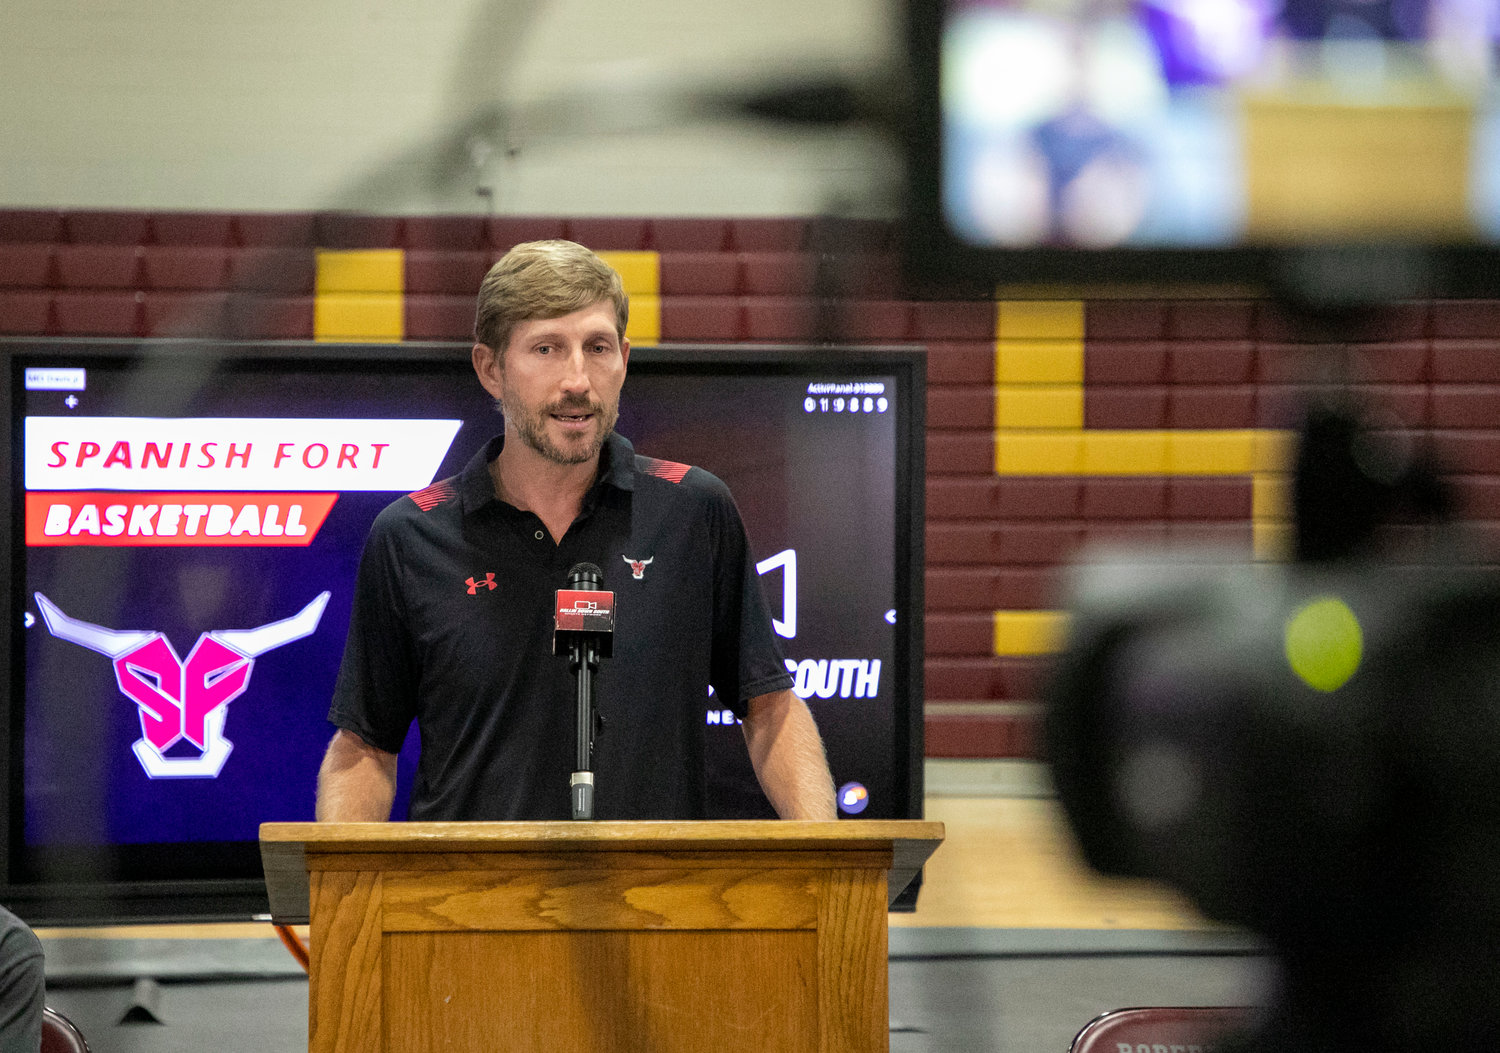 Spanish Fort head coach Jimbo Tolbert responds to a question during the basketball media day event hosted by the Ballin Down South Sports Network at Robertsdale High School Sunday, Oct. 16. Tolbert is entering his fifth year at the helm of the Toro program.